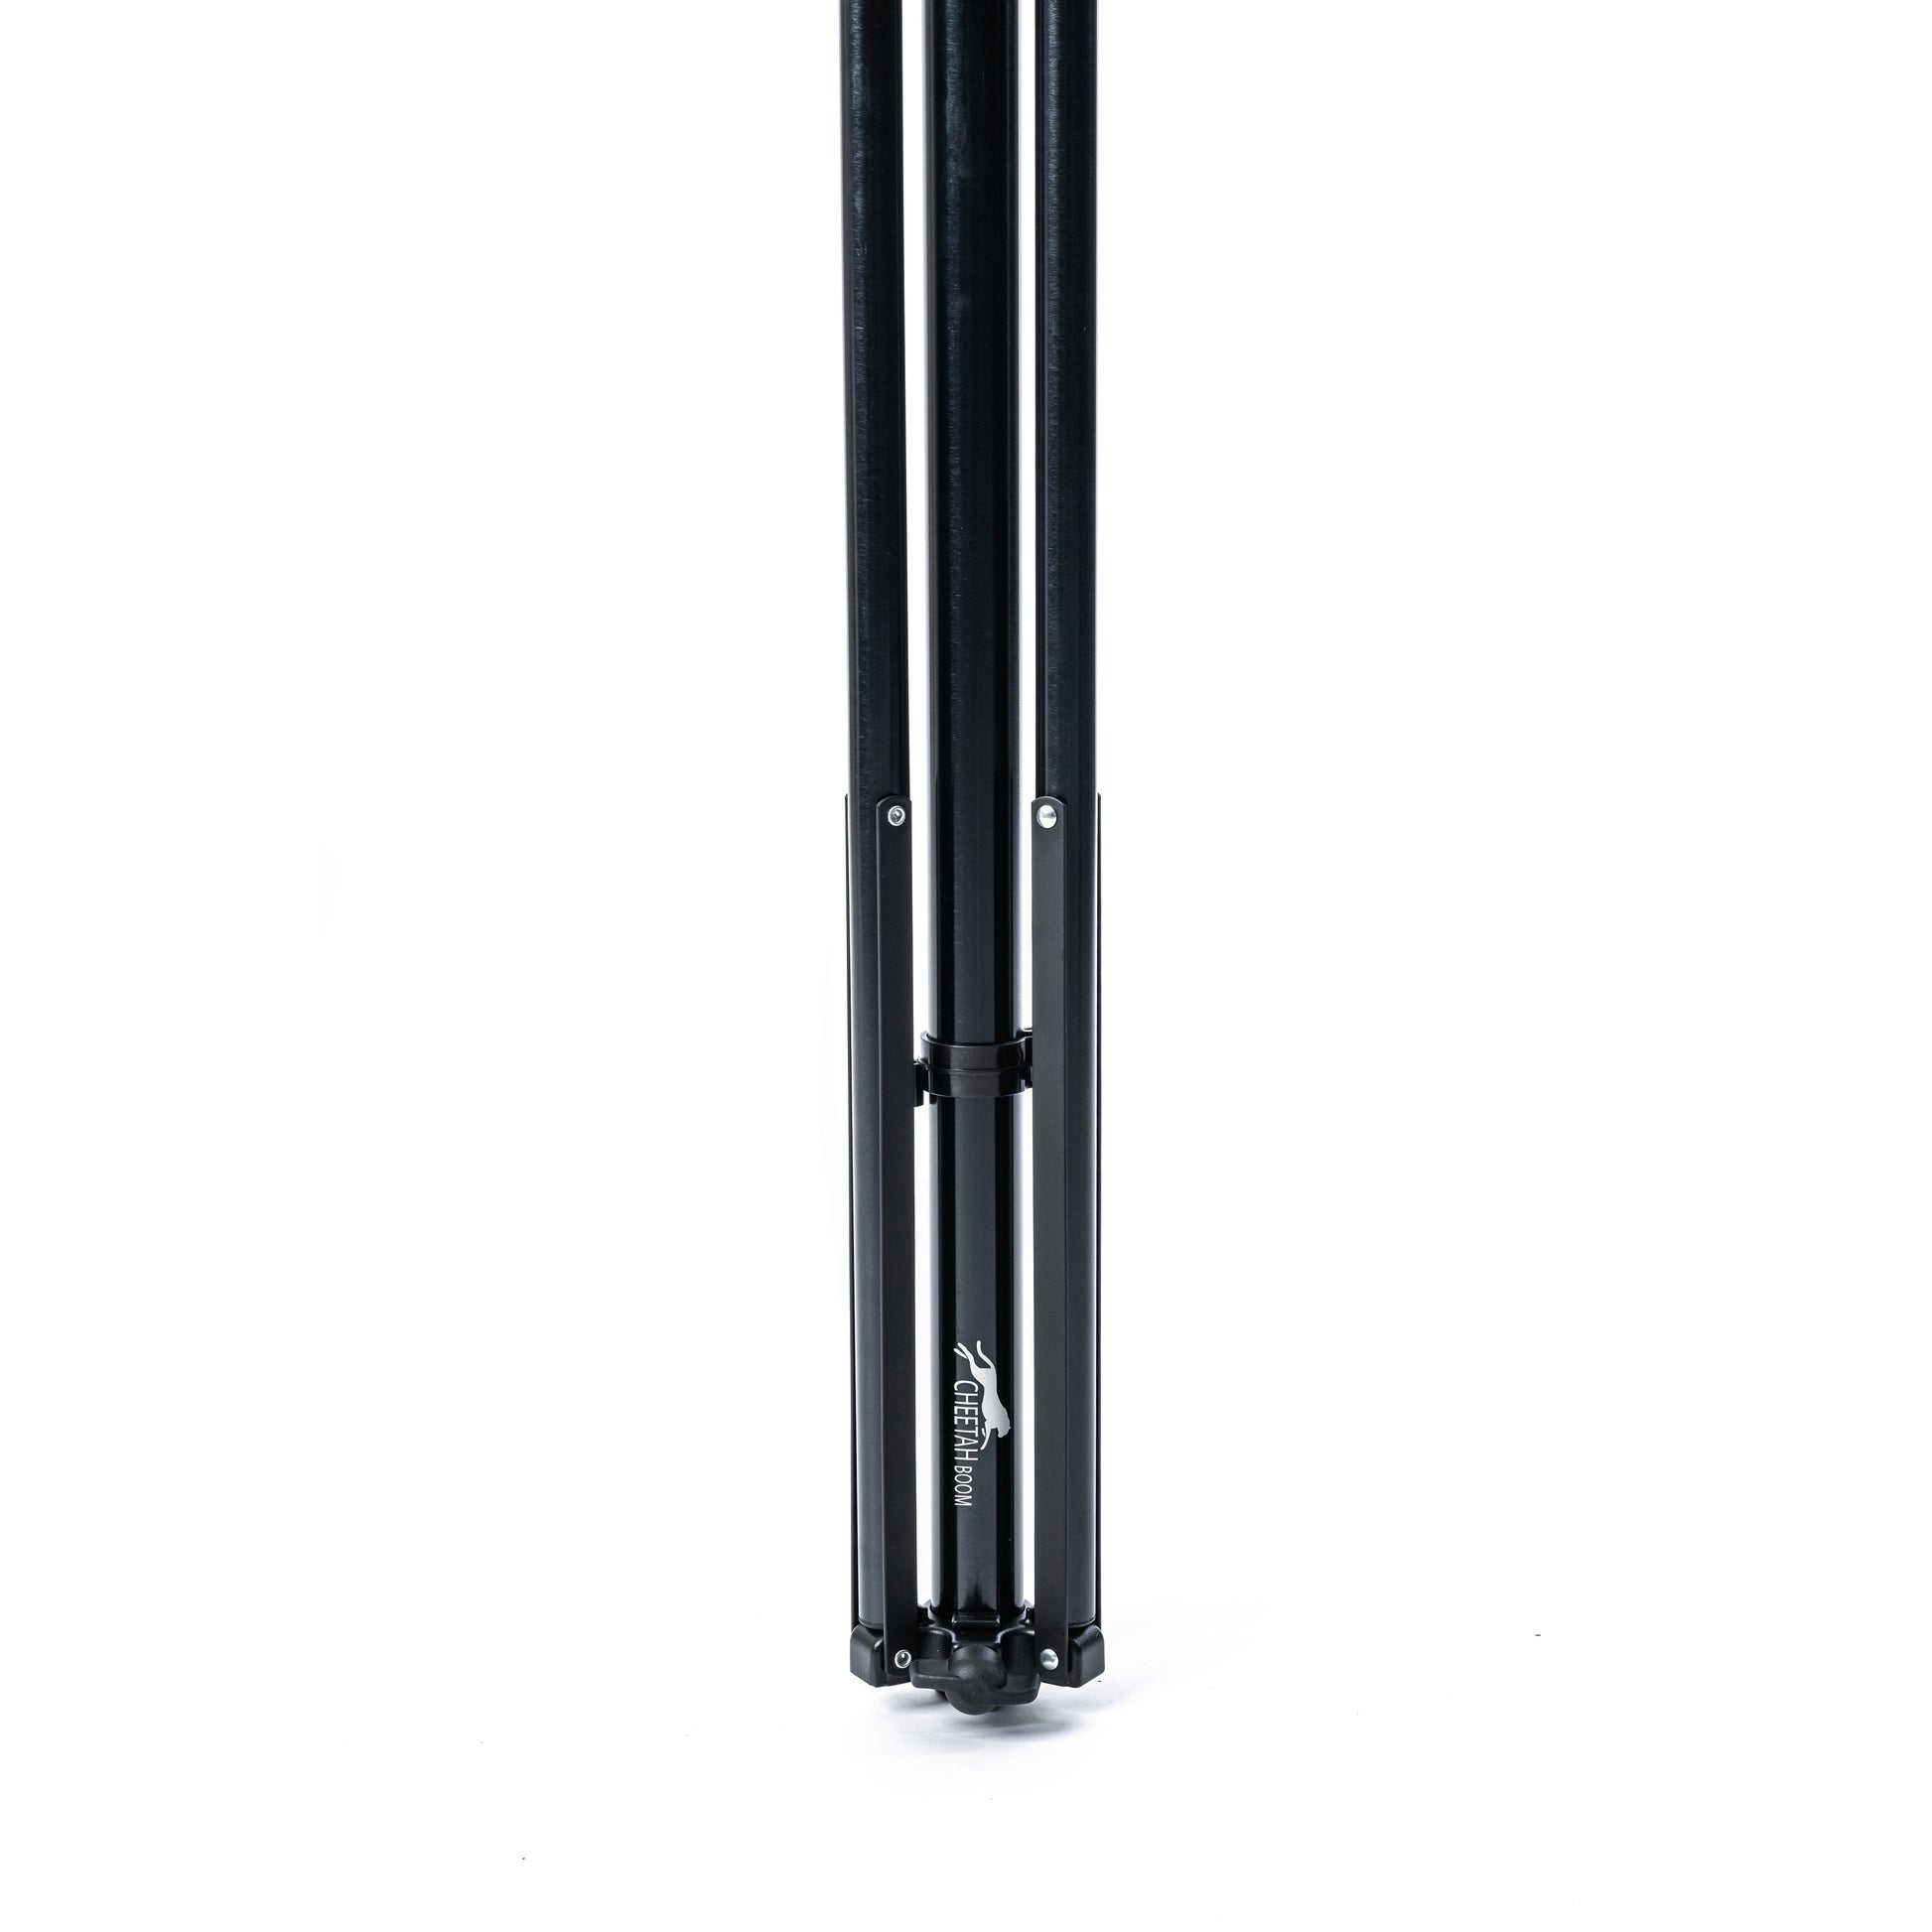 Cheetah Boom is 2-in-1 convertible light stand and boom stand mounting and handle Legs Folded